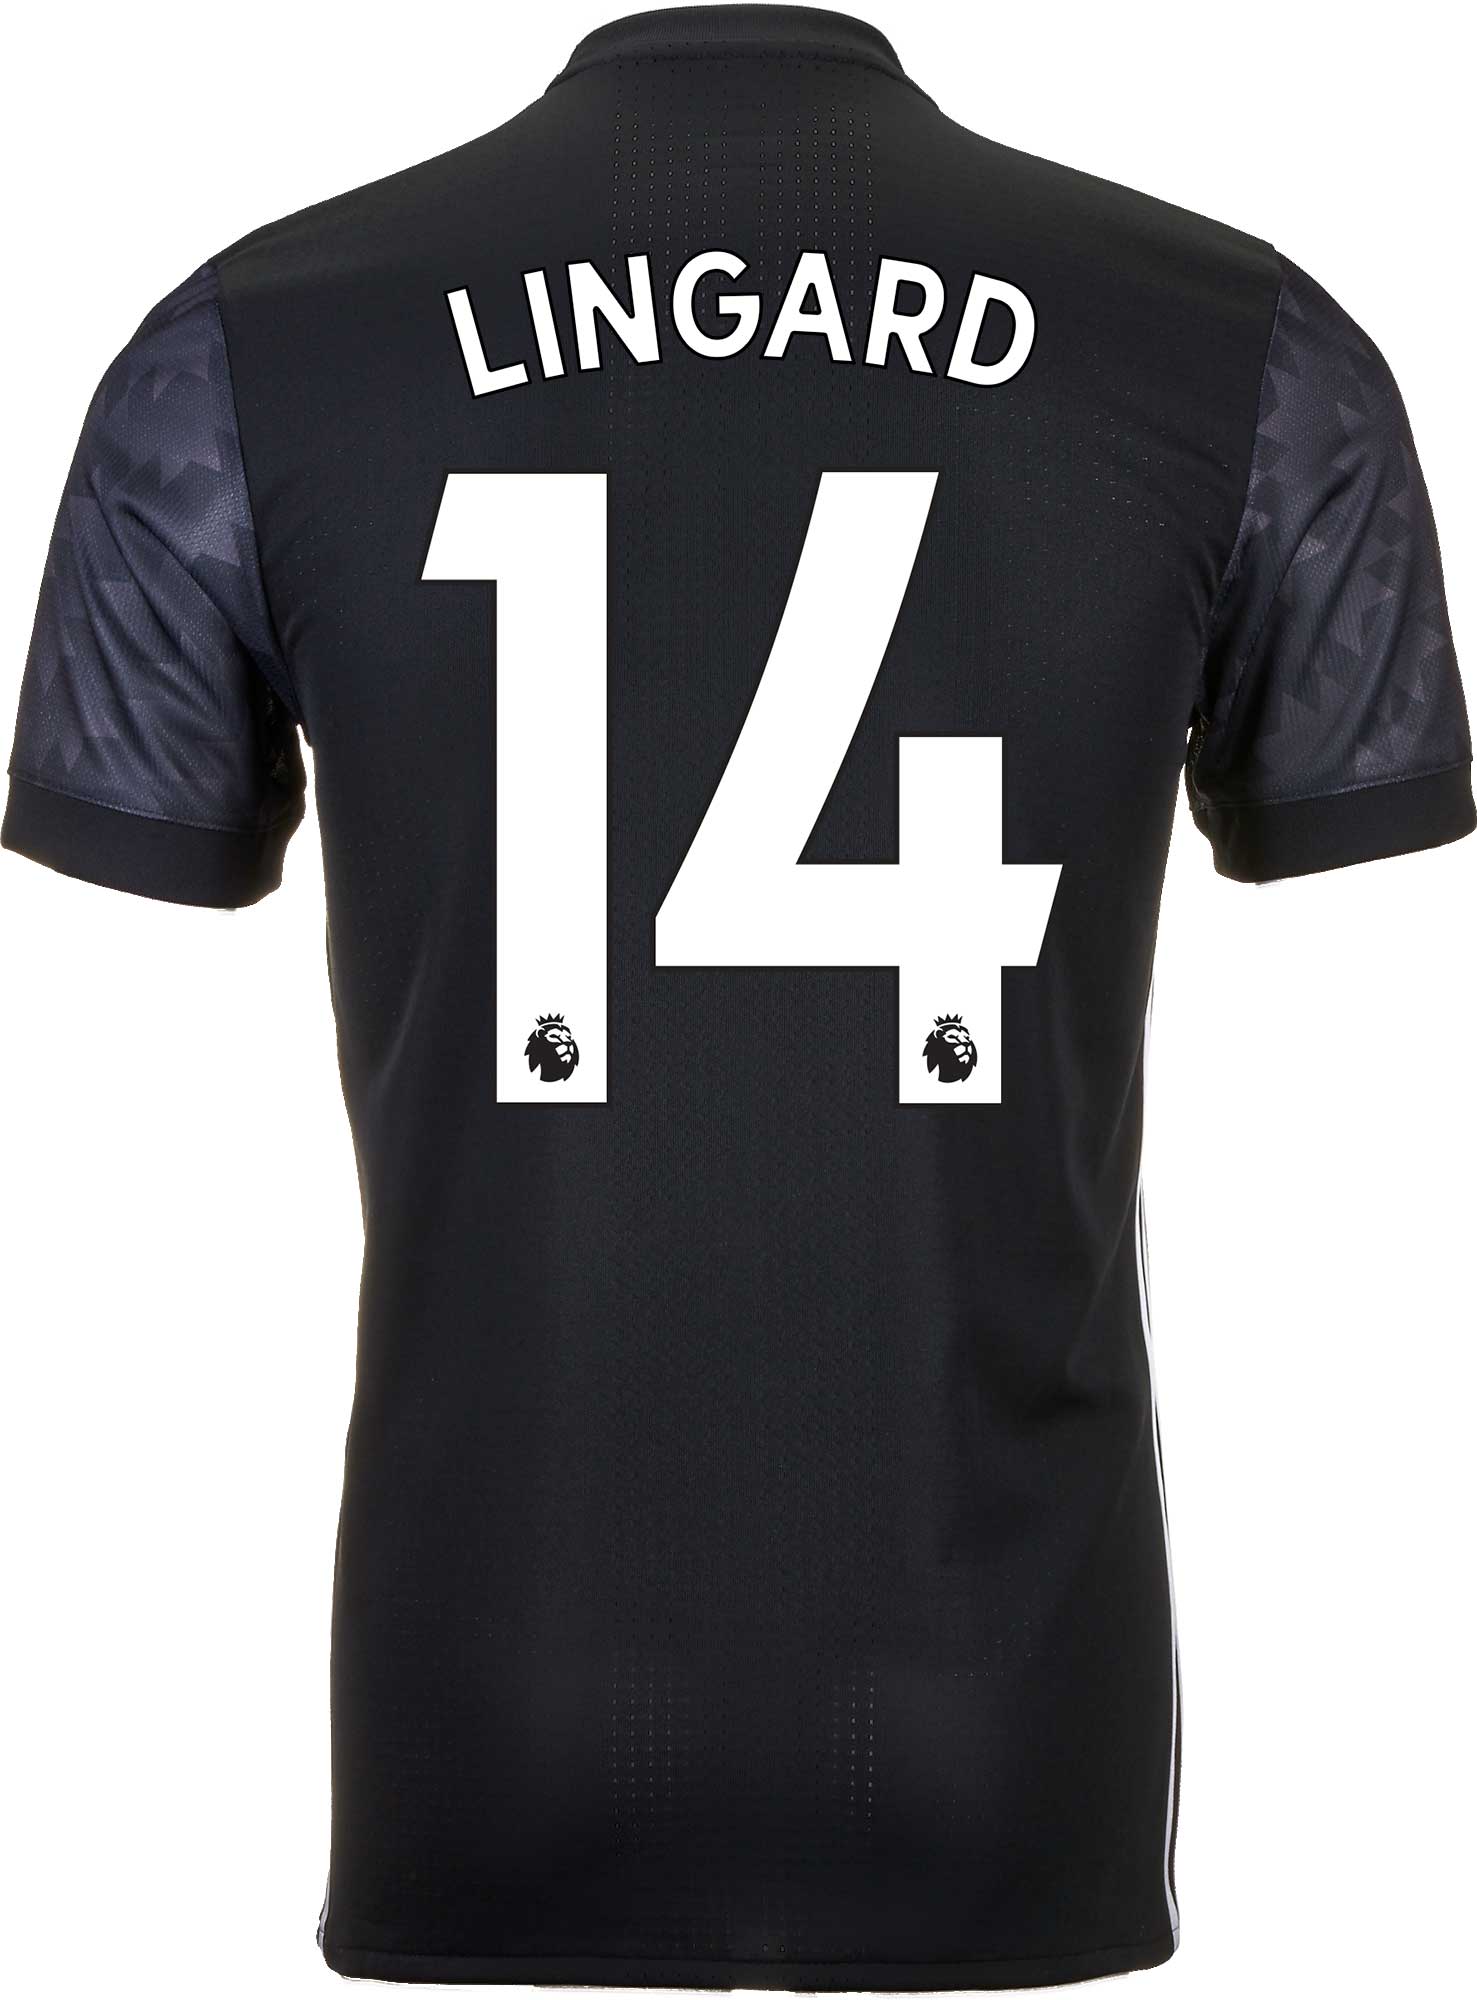 2017/18 adidas Jesse Lingard Manchester United Authentic Away Jersey